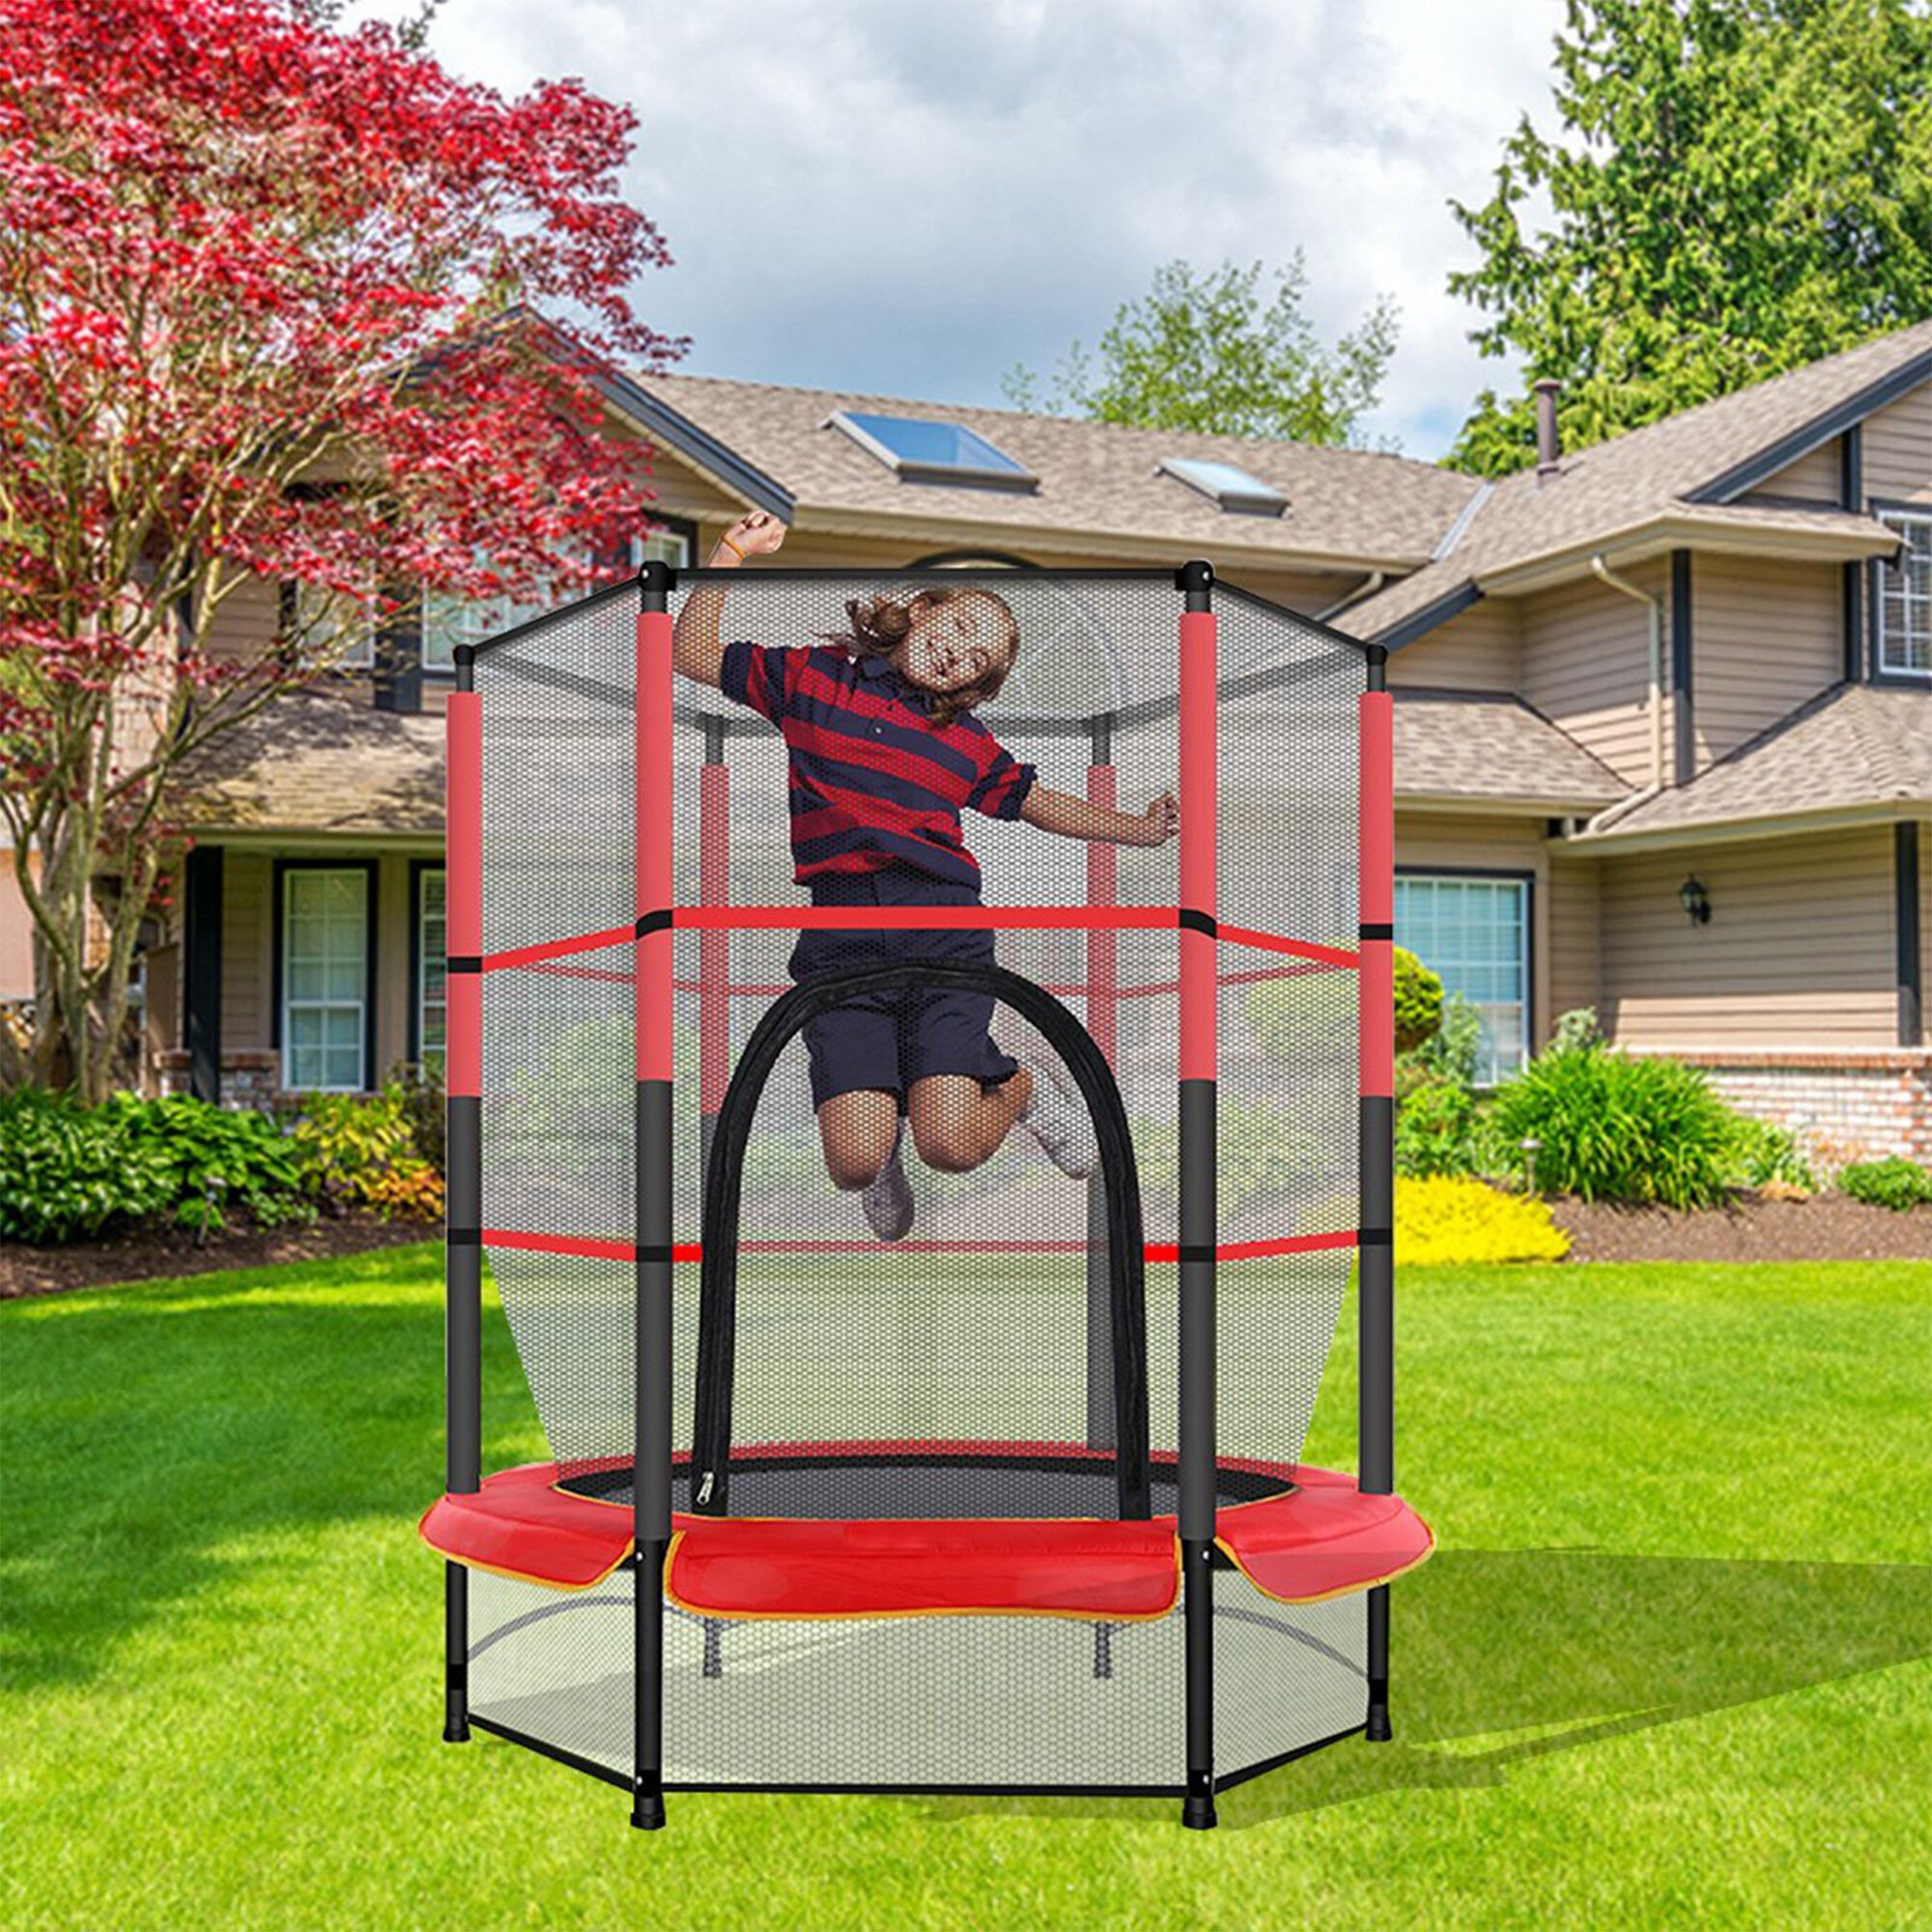 Details about   55In Kids Trampoline With Enclosure Net Jumping Mat And Spring Cover Padding 